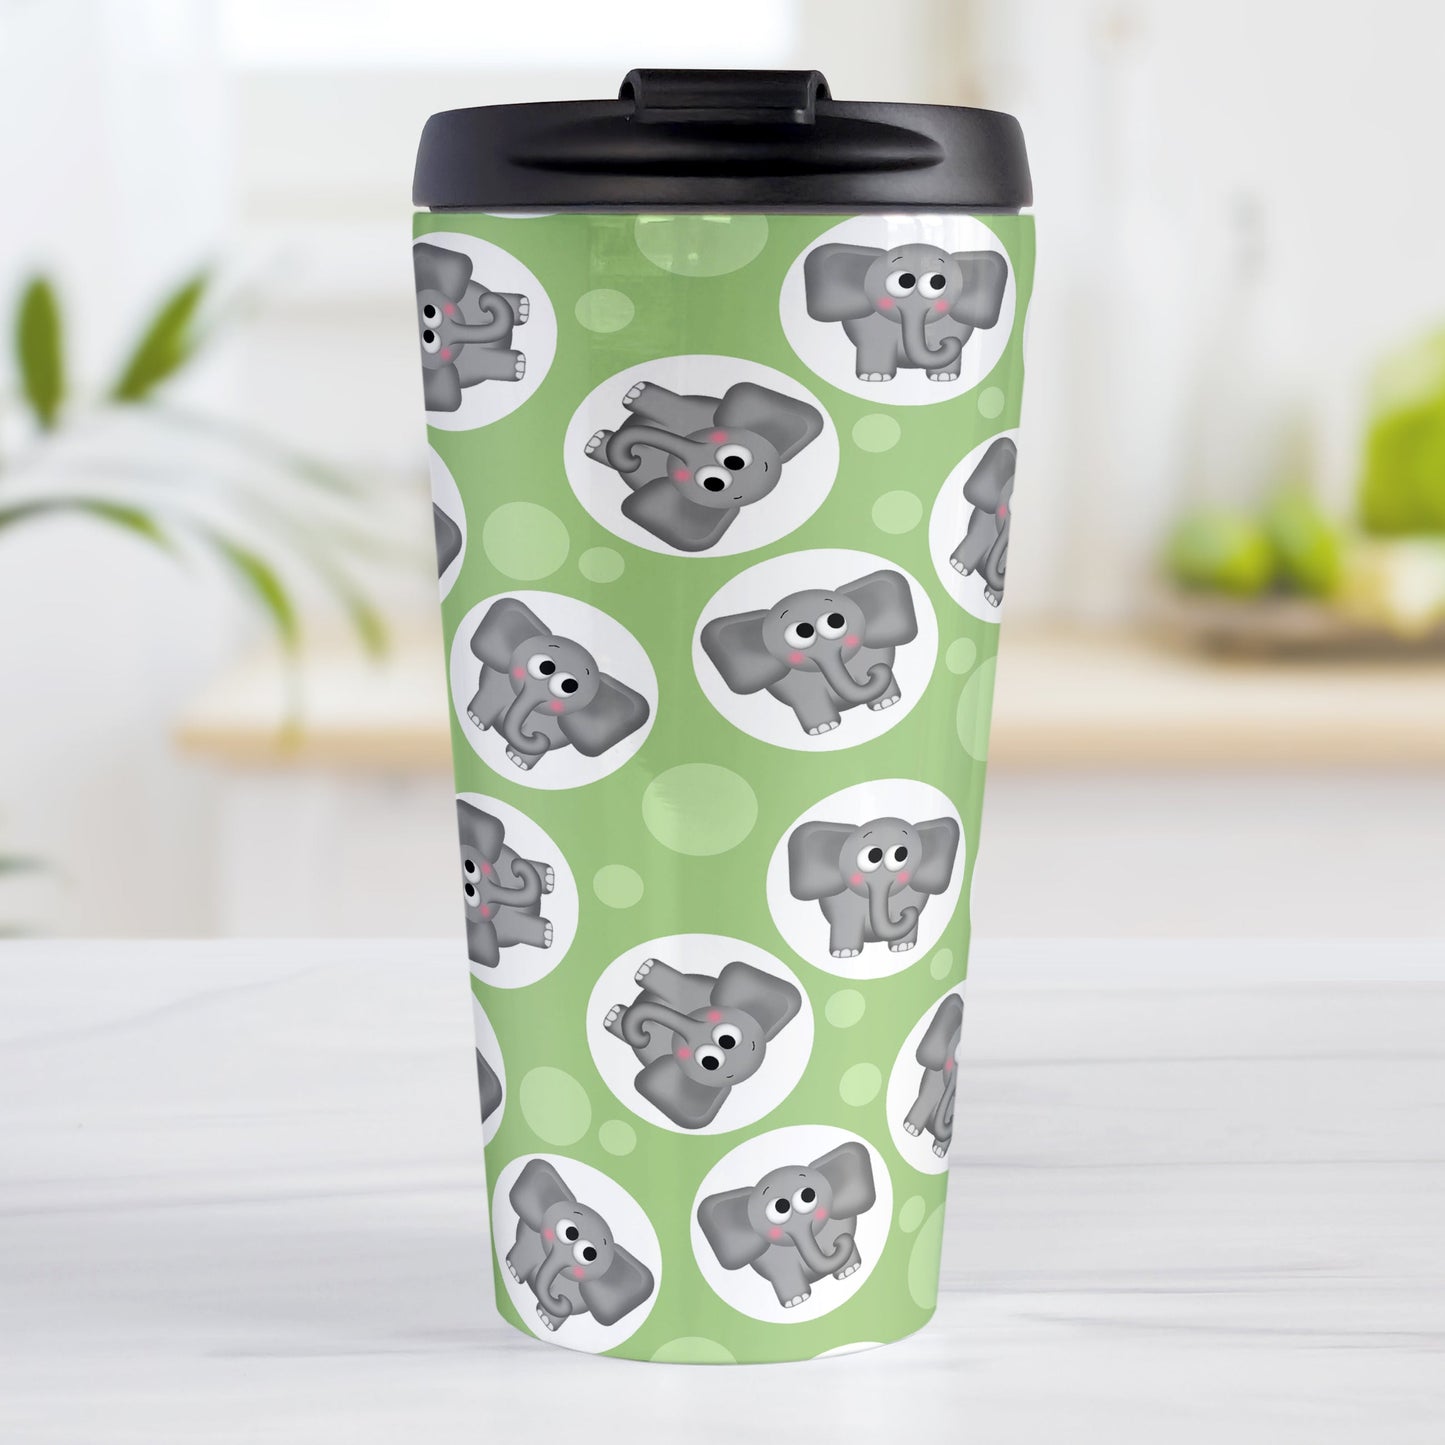 Cute Green Elephant Pattern Travel Mug (15oz, stainless steel insulated) at Amy's Coffee Mugs